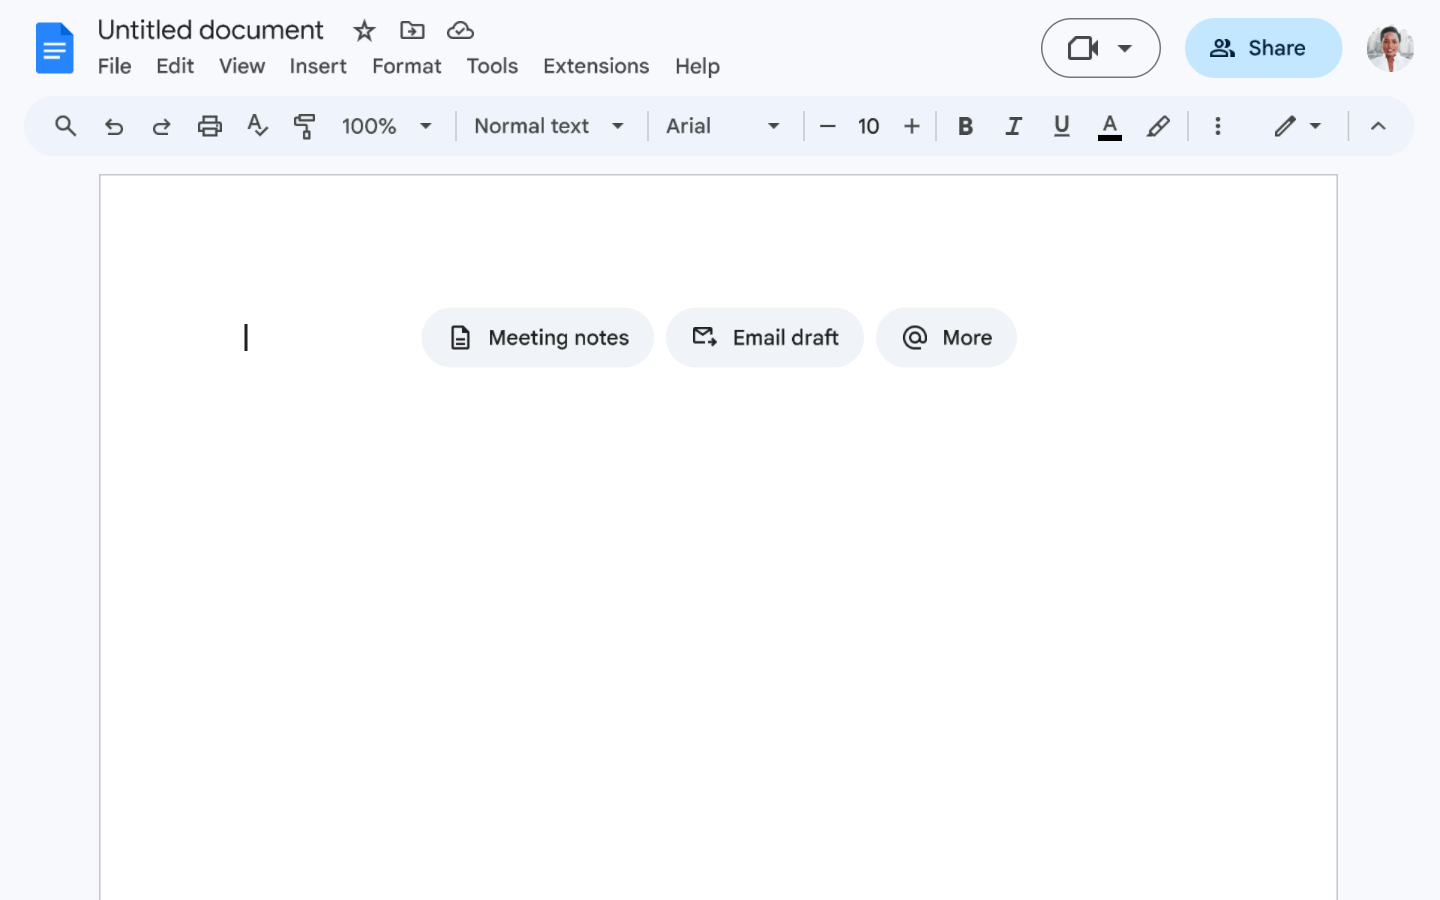 New buttons allow you to insert building blocks and more when creating a new document.